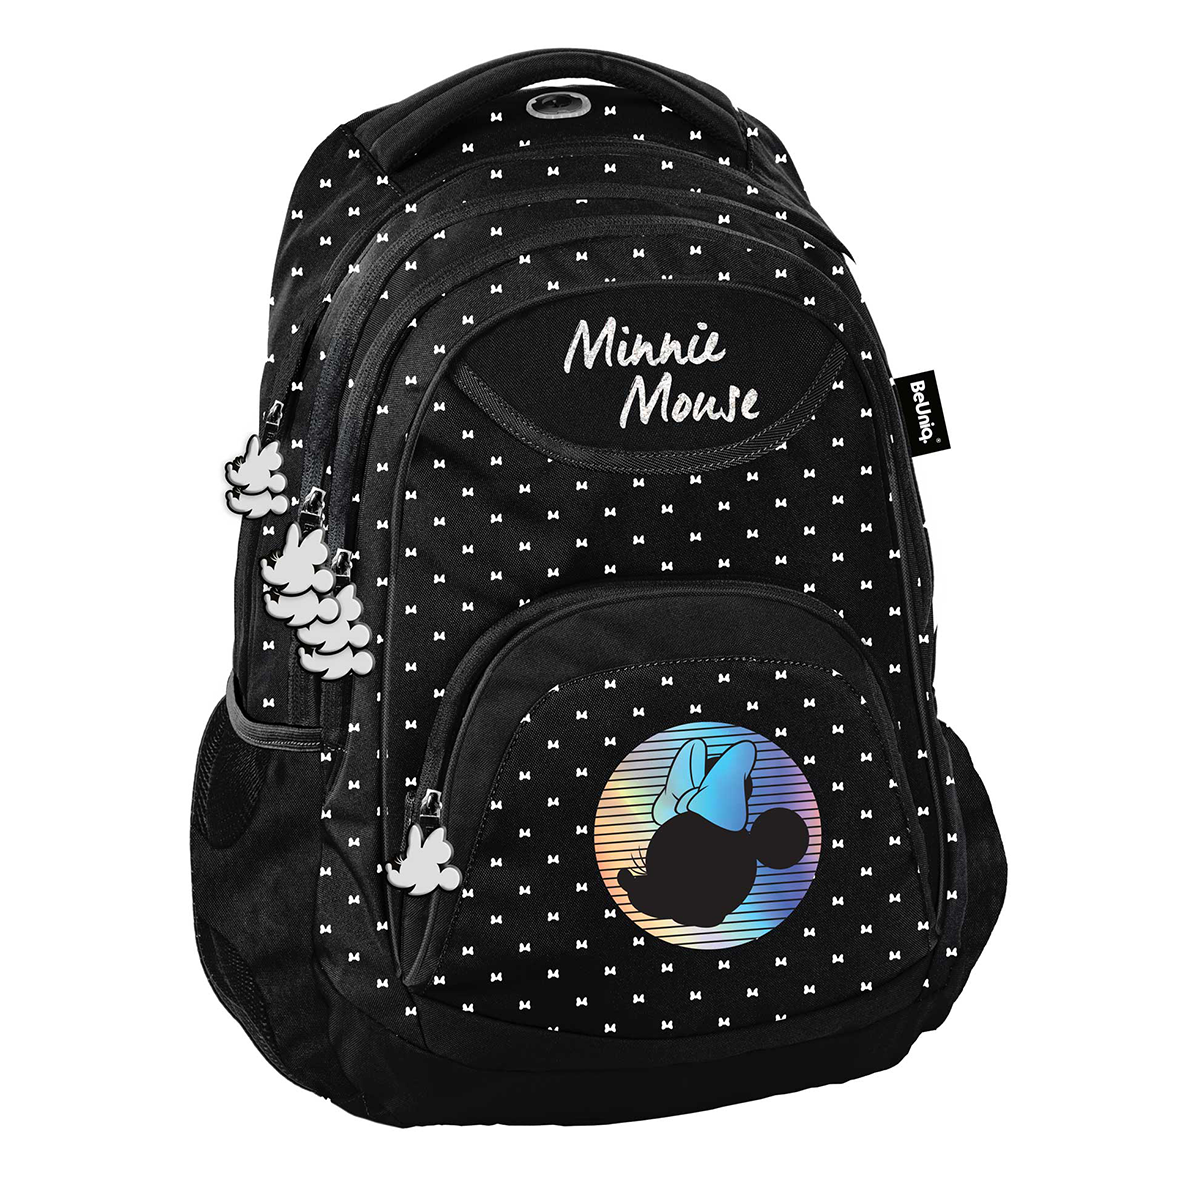 Disney Minnie Mouse Backpack, Shine - 41 x 30 x 20 cm - Polyester